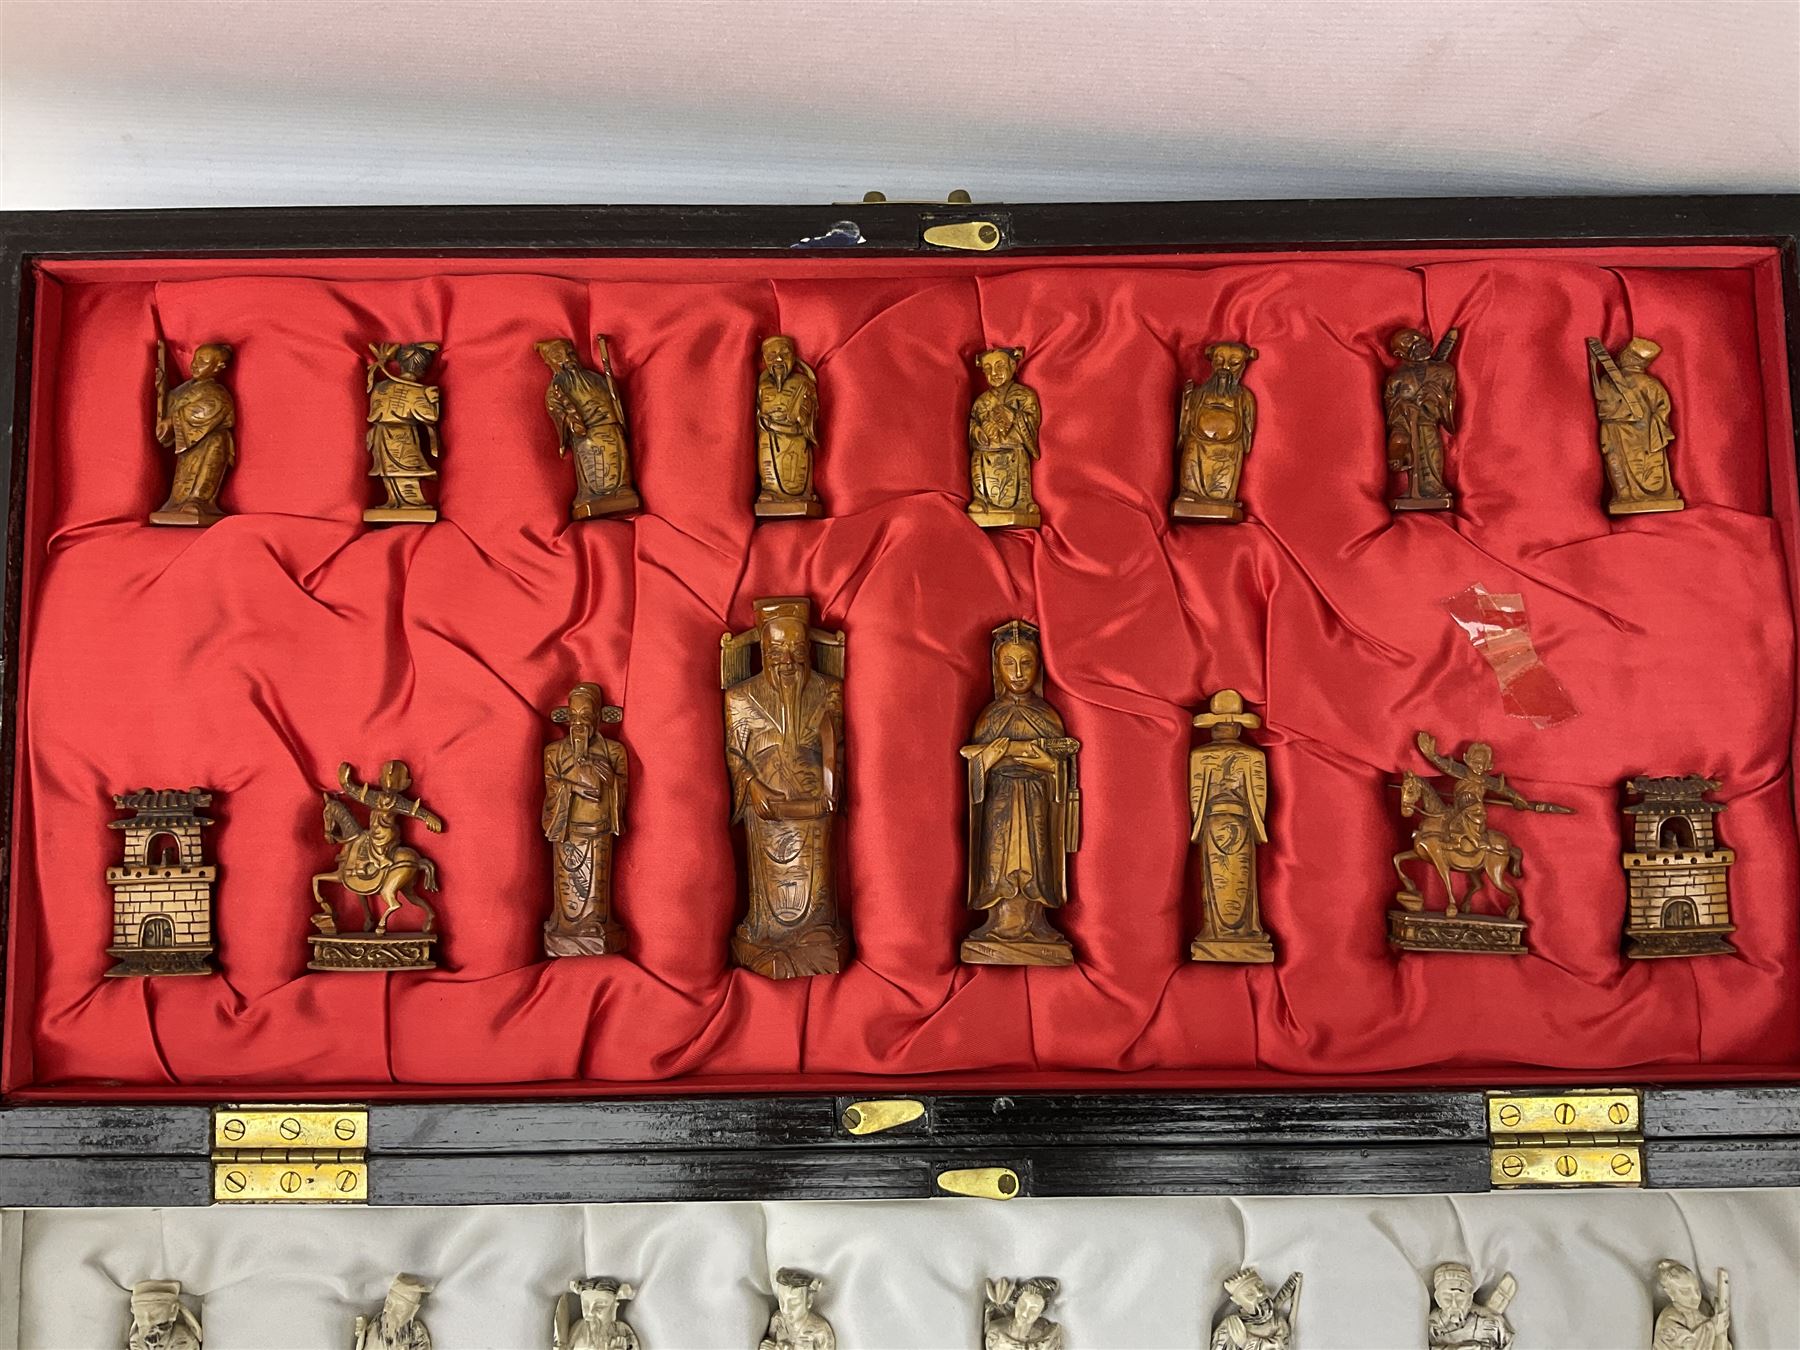 Chinese style chess set and folding storage board - Image 3 of 5